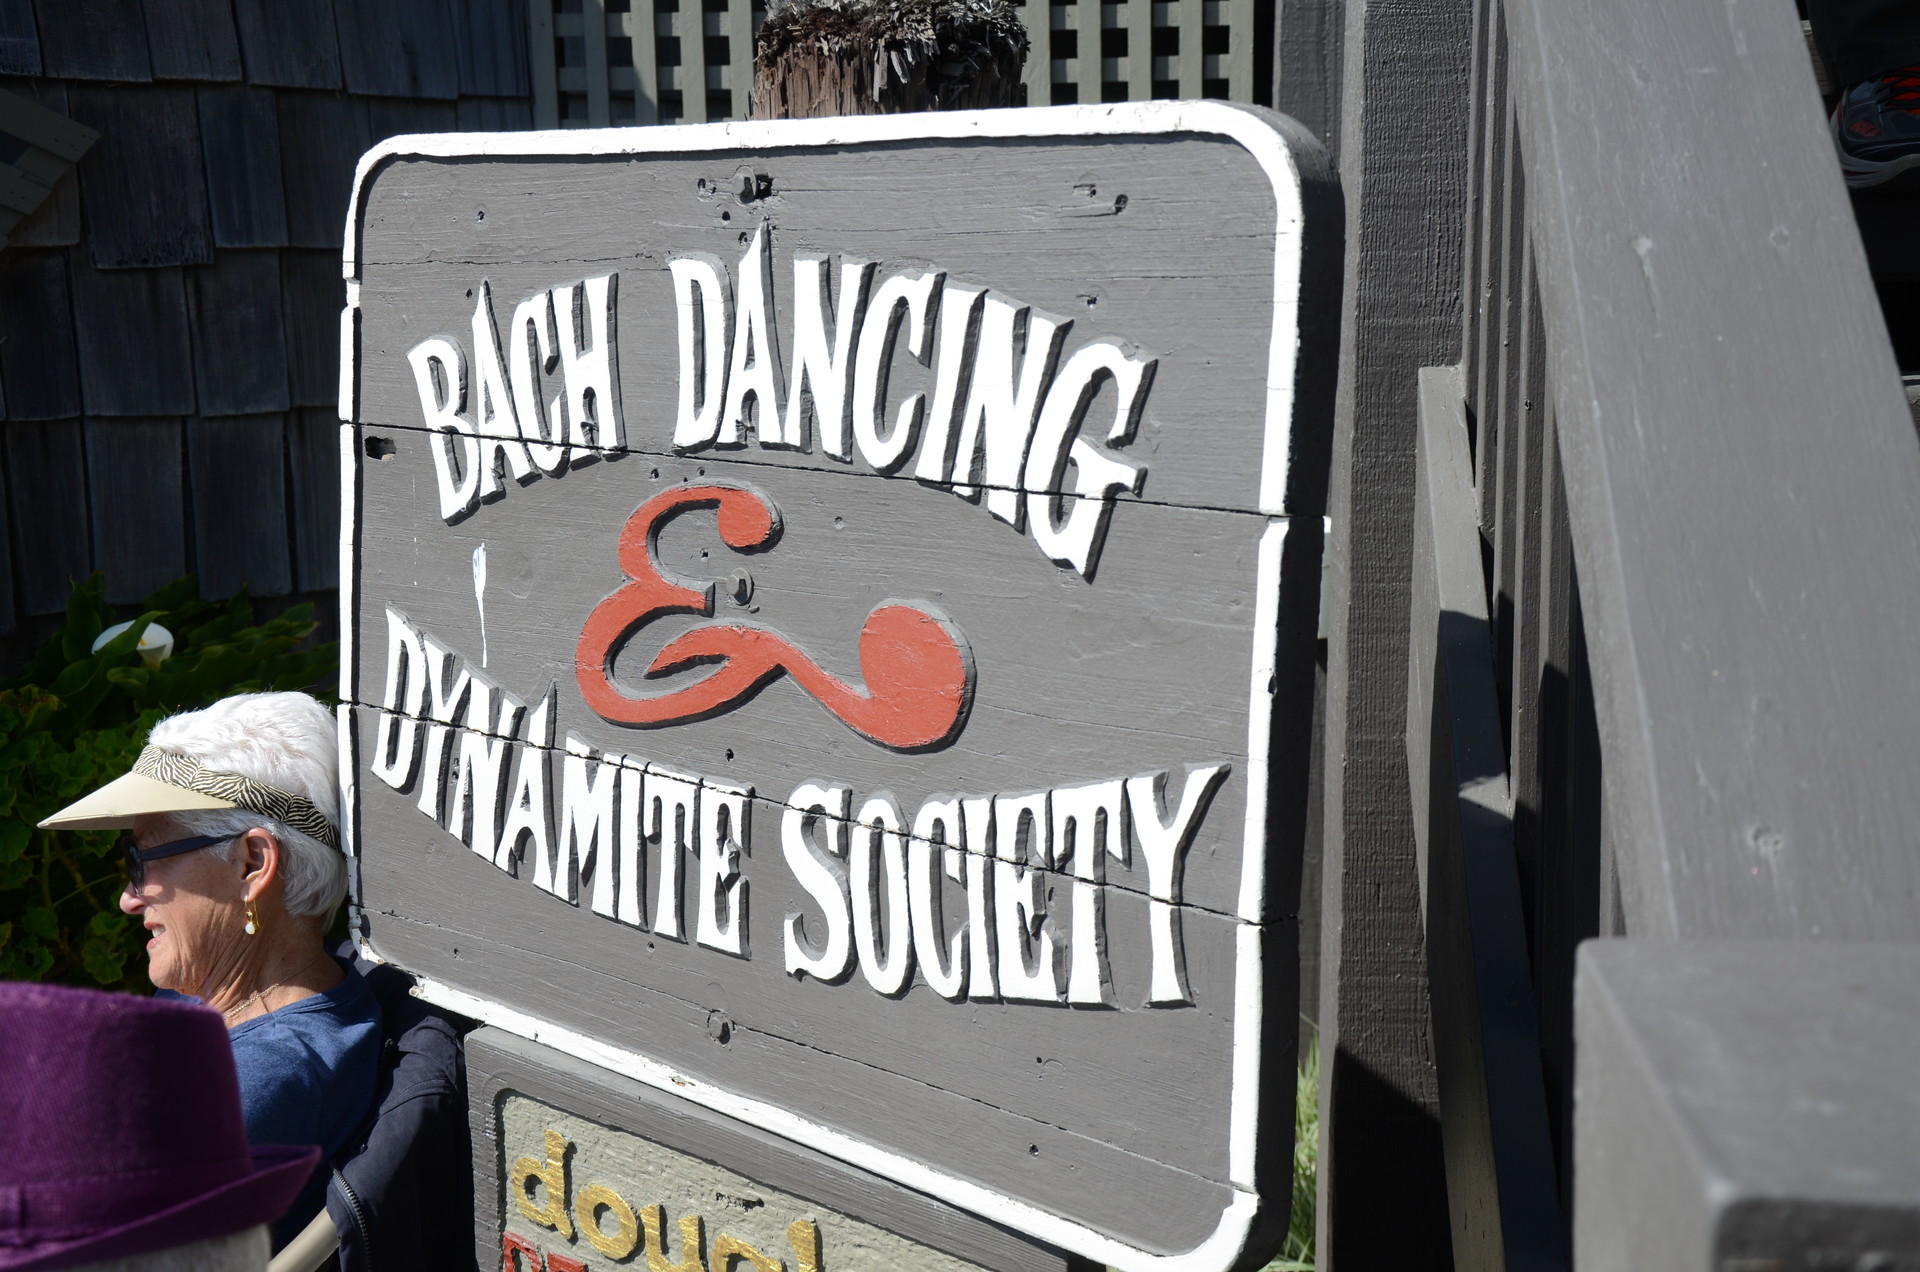 The Bach Dancing and Dynamite Society in Half Moon Bay grew out of the impromptu jazz concerts Pete Douglas would throw in his living room.